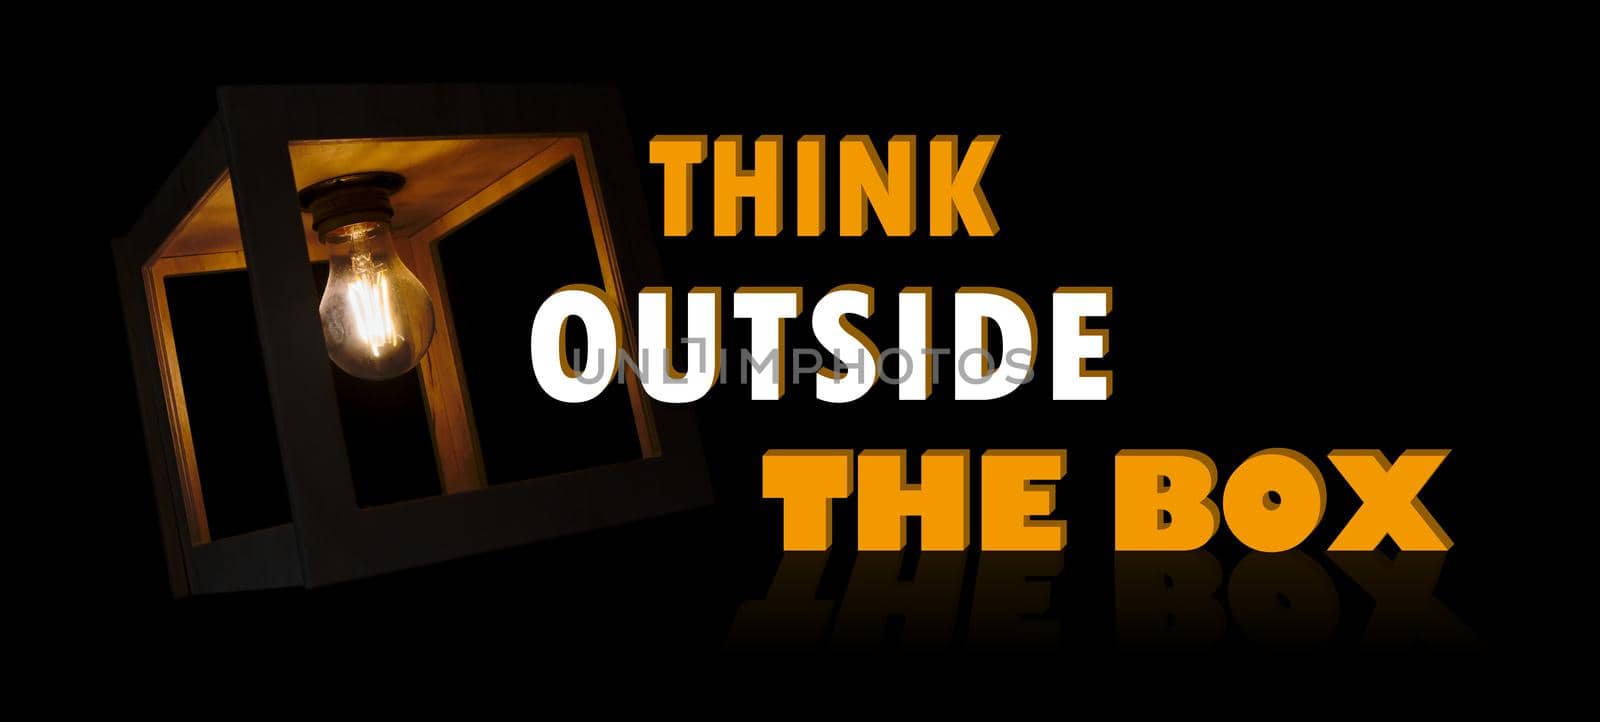 Think outside the box motivational message with a light bulb shining in a wooden box frame